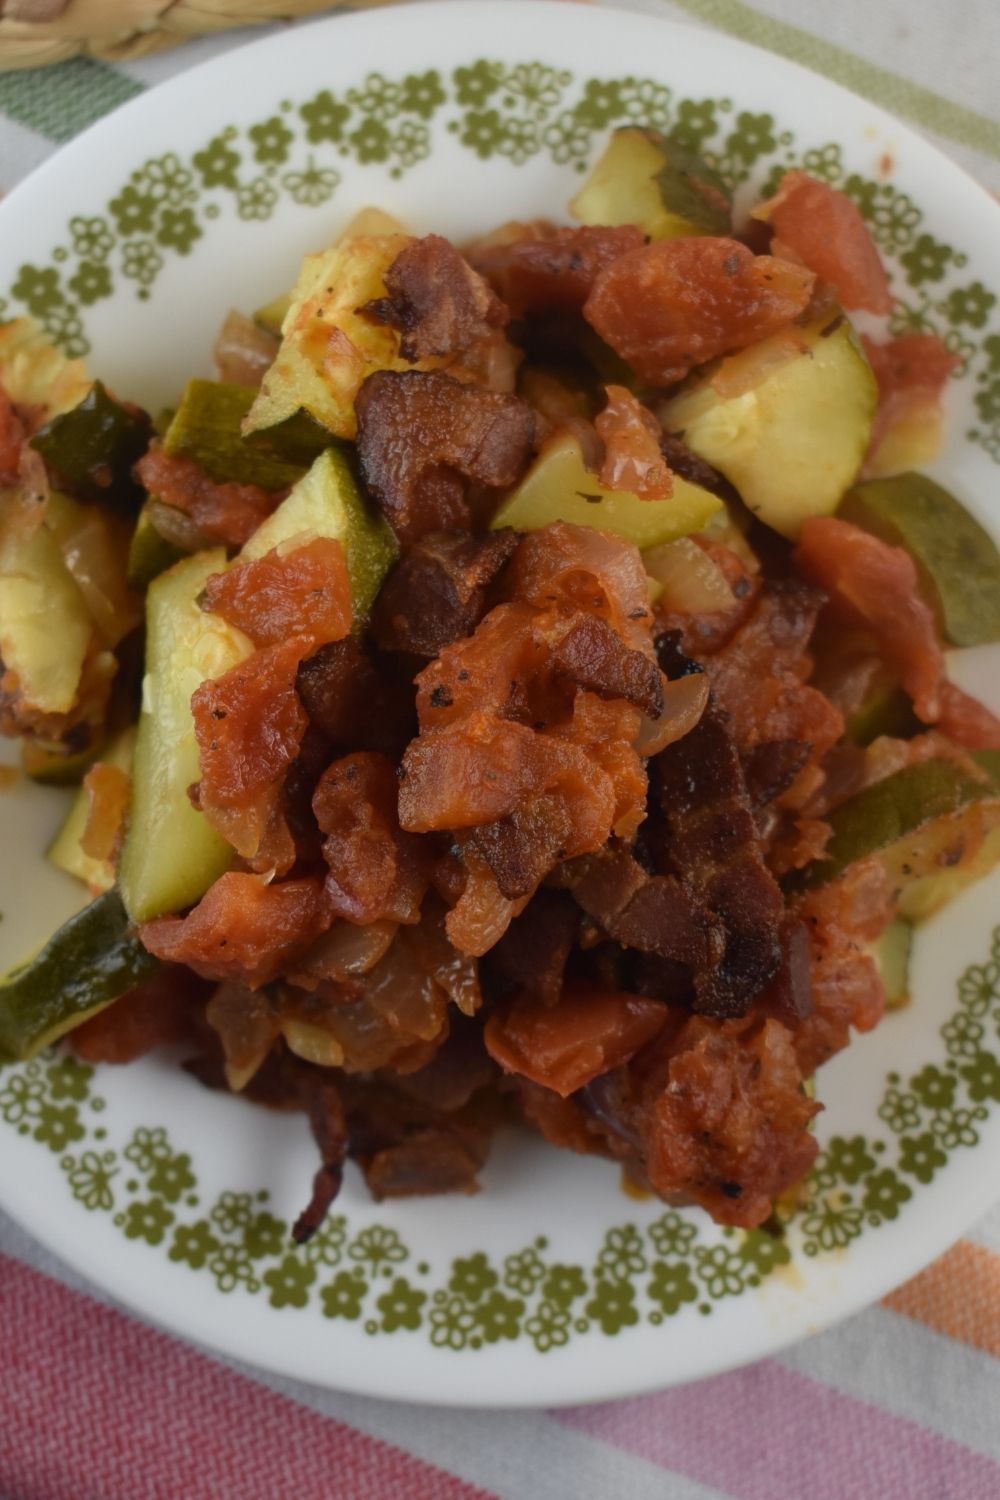 Zucchini Tomato Bacon Bake is the a new spin on zucchini casserole.  Chunks of zucchini are baked in a homemade marinara sauce and topped with crispy bacon.  Zucchini Bacon Casserole is the perfect addition to your meal.